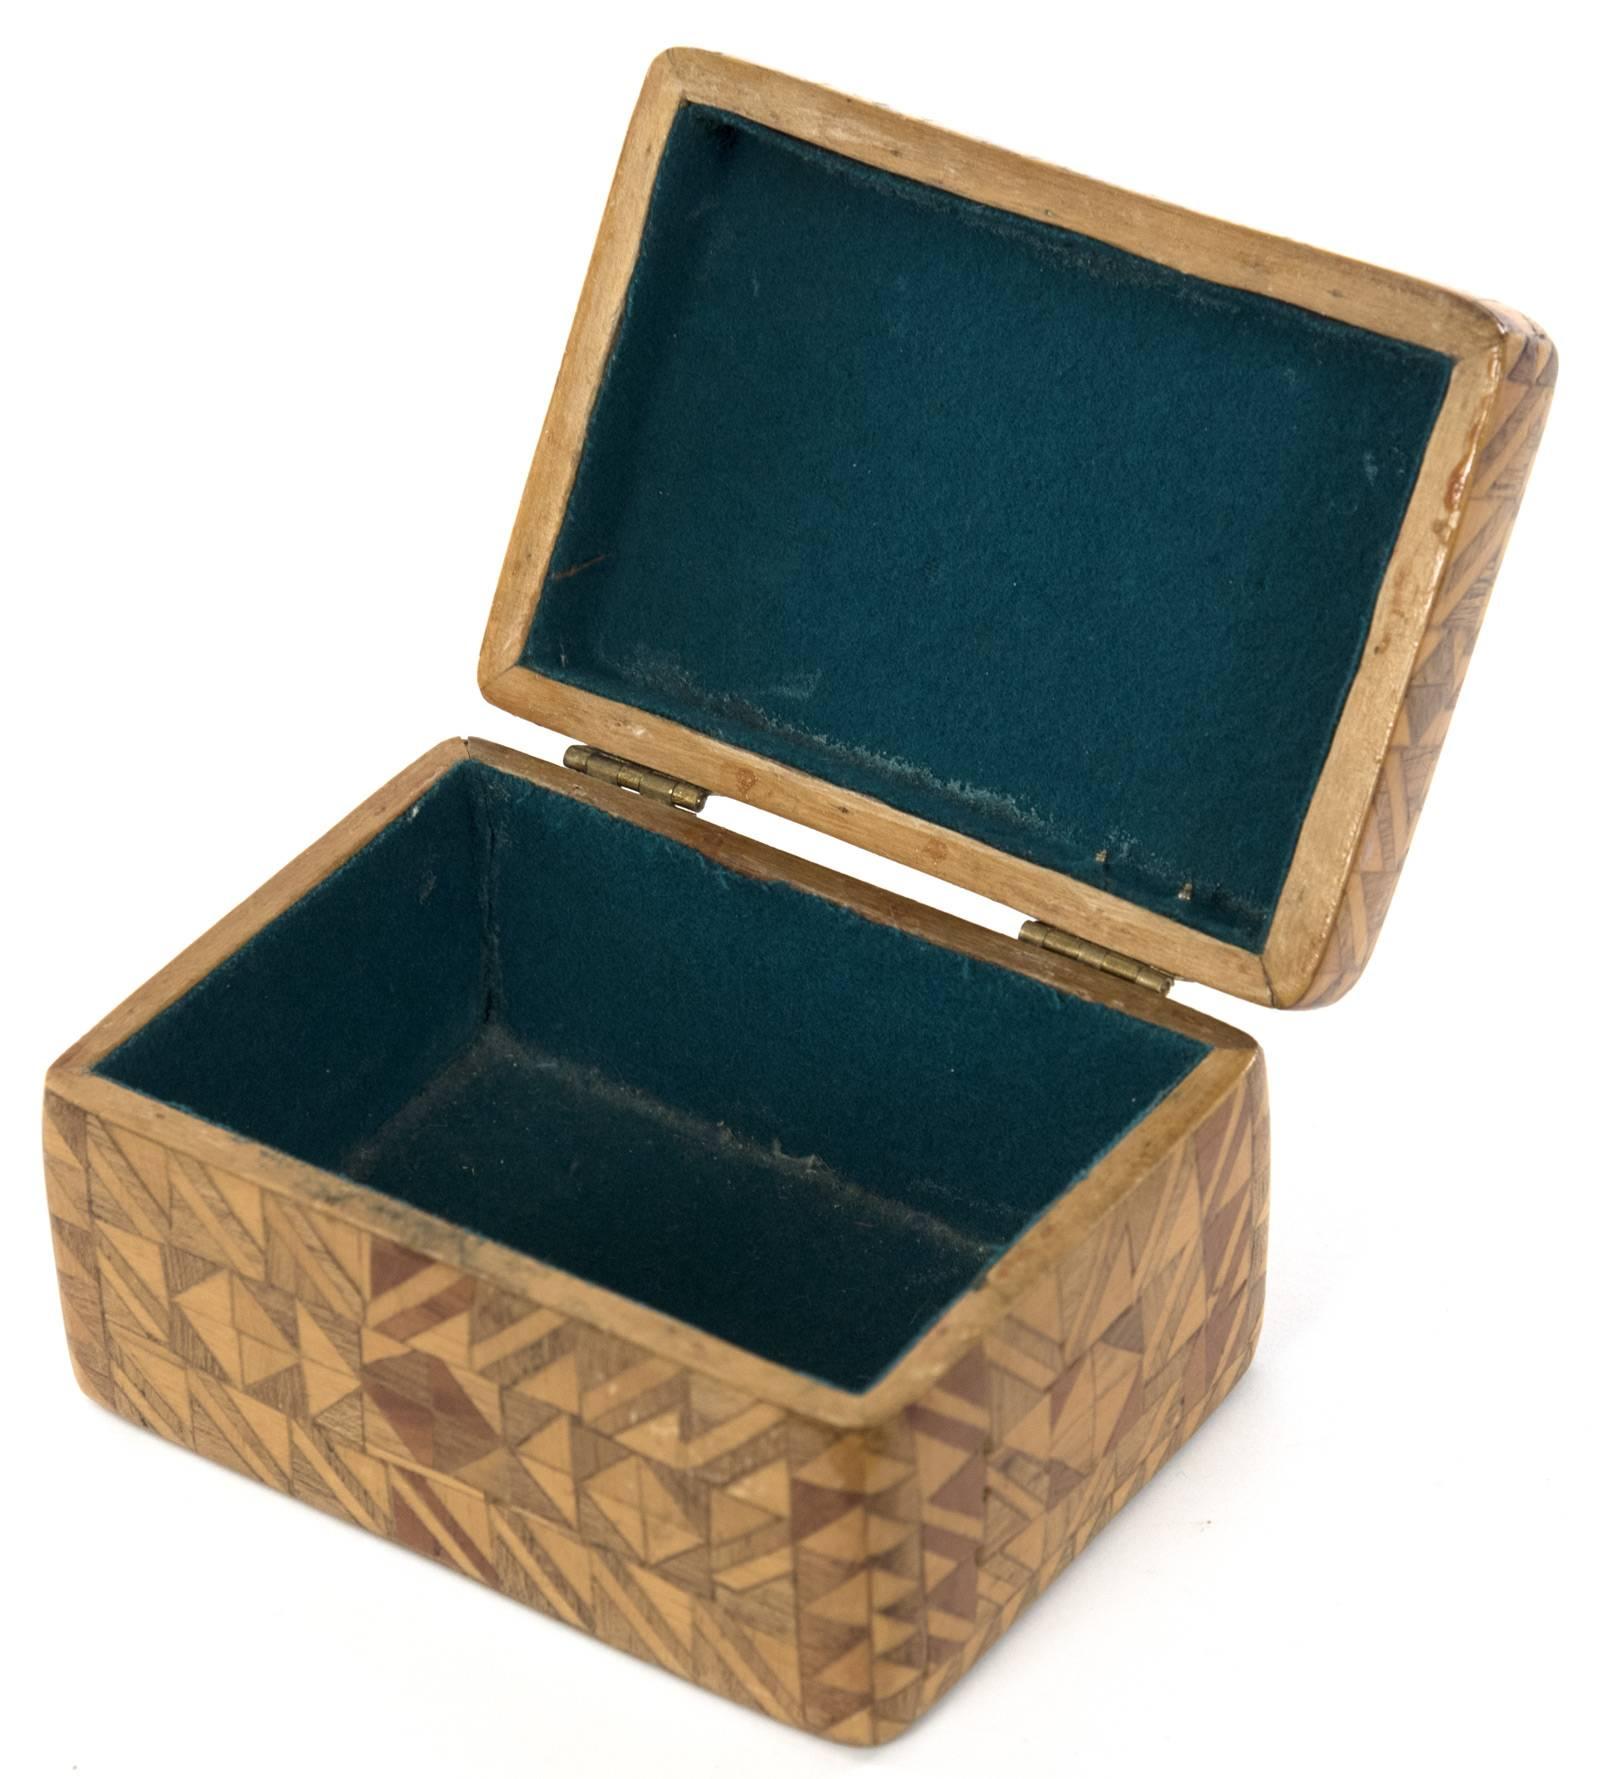 A decorative box with hinged lid, entirely covered with a veneer of several contrasting types of wood in a geometric parquet design comprised of squares, triangles and lozenges. Interior of box is a single compartment lined with green felt. Base of